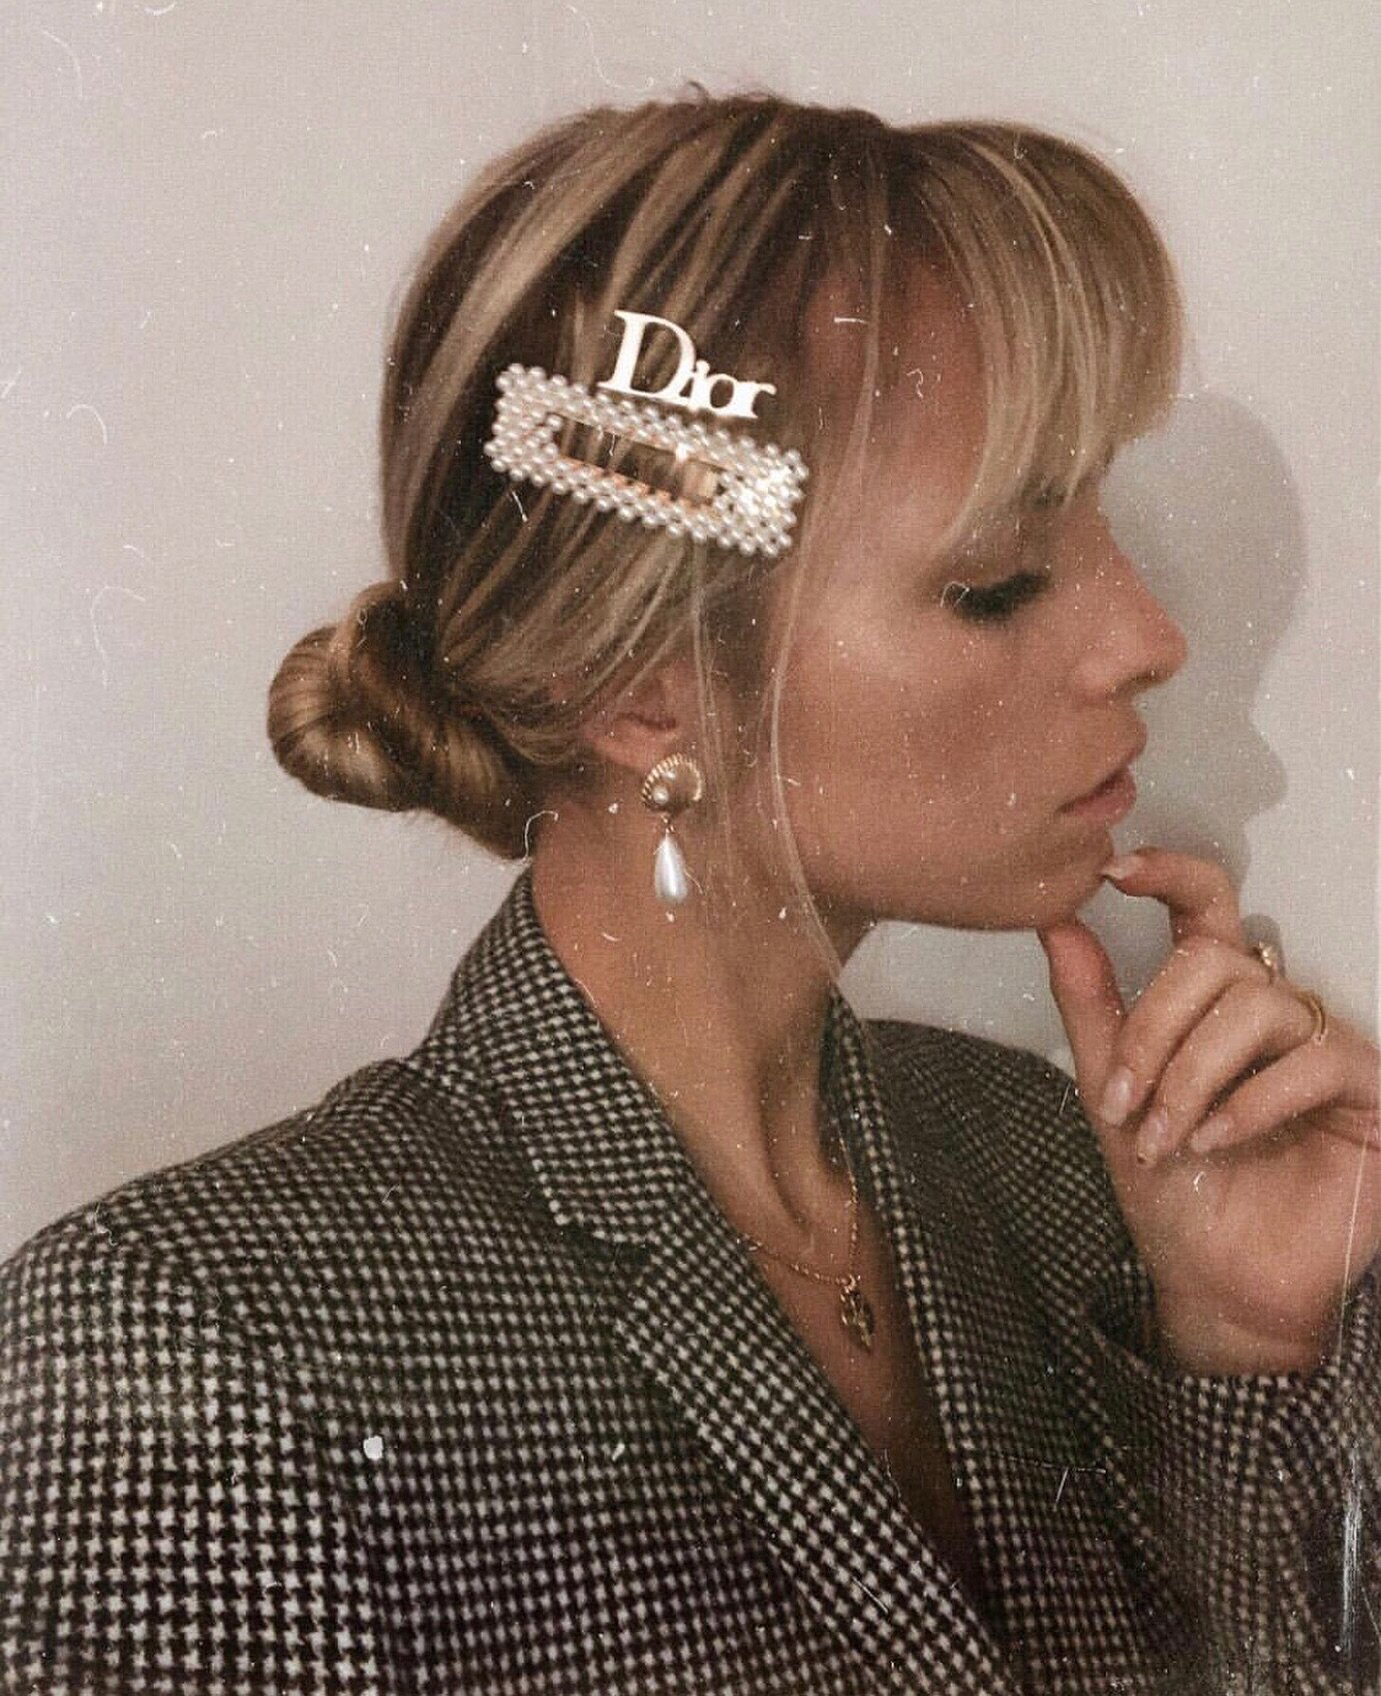 Obsessed with pearl hair clips 😍😍

#pearlhairclips #pearlhairpins #olivierluxe #hairaccessories #hairjewellery